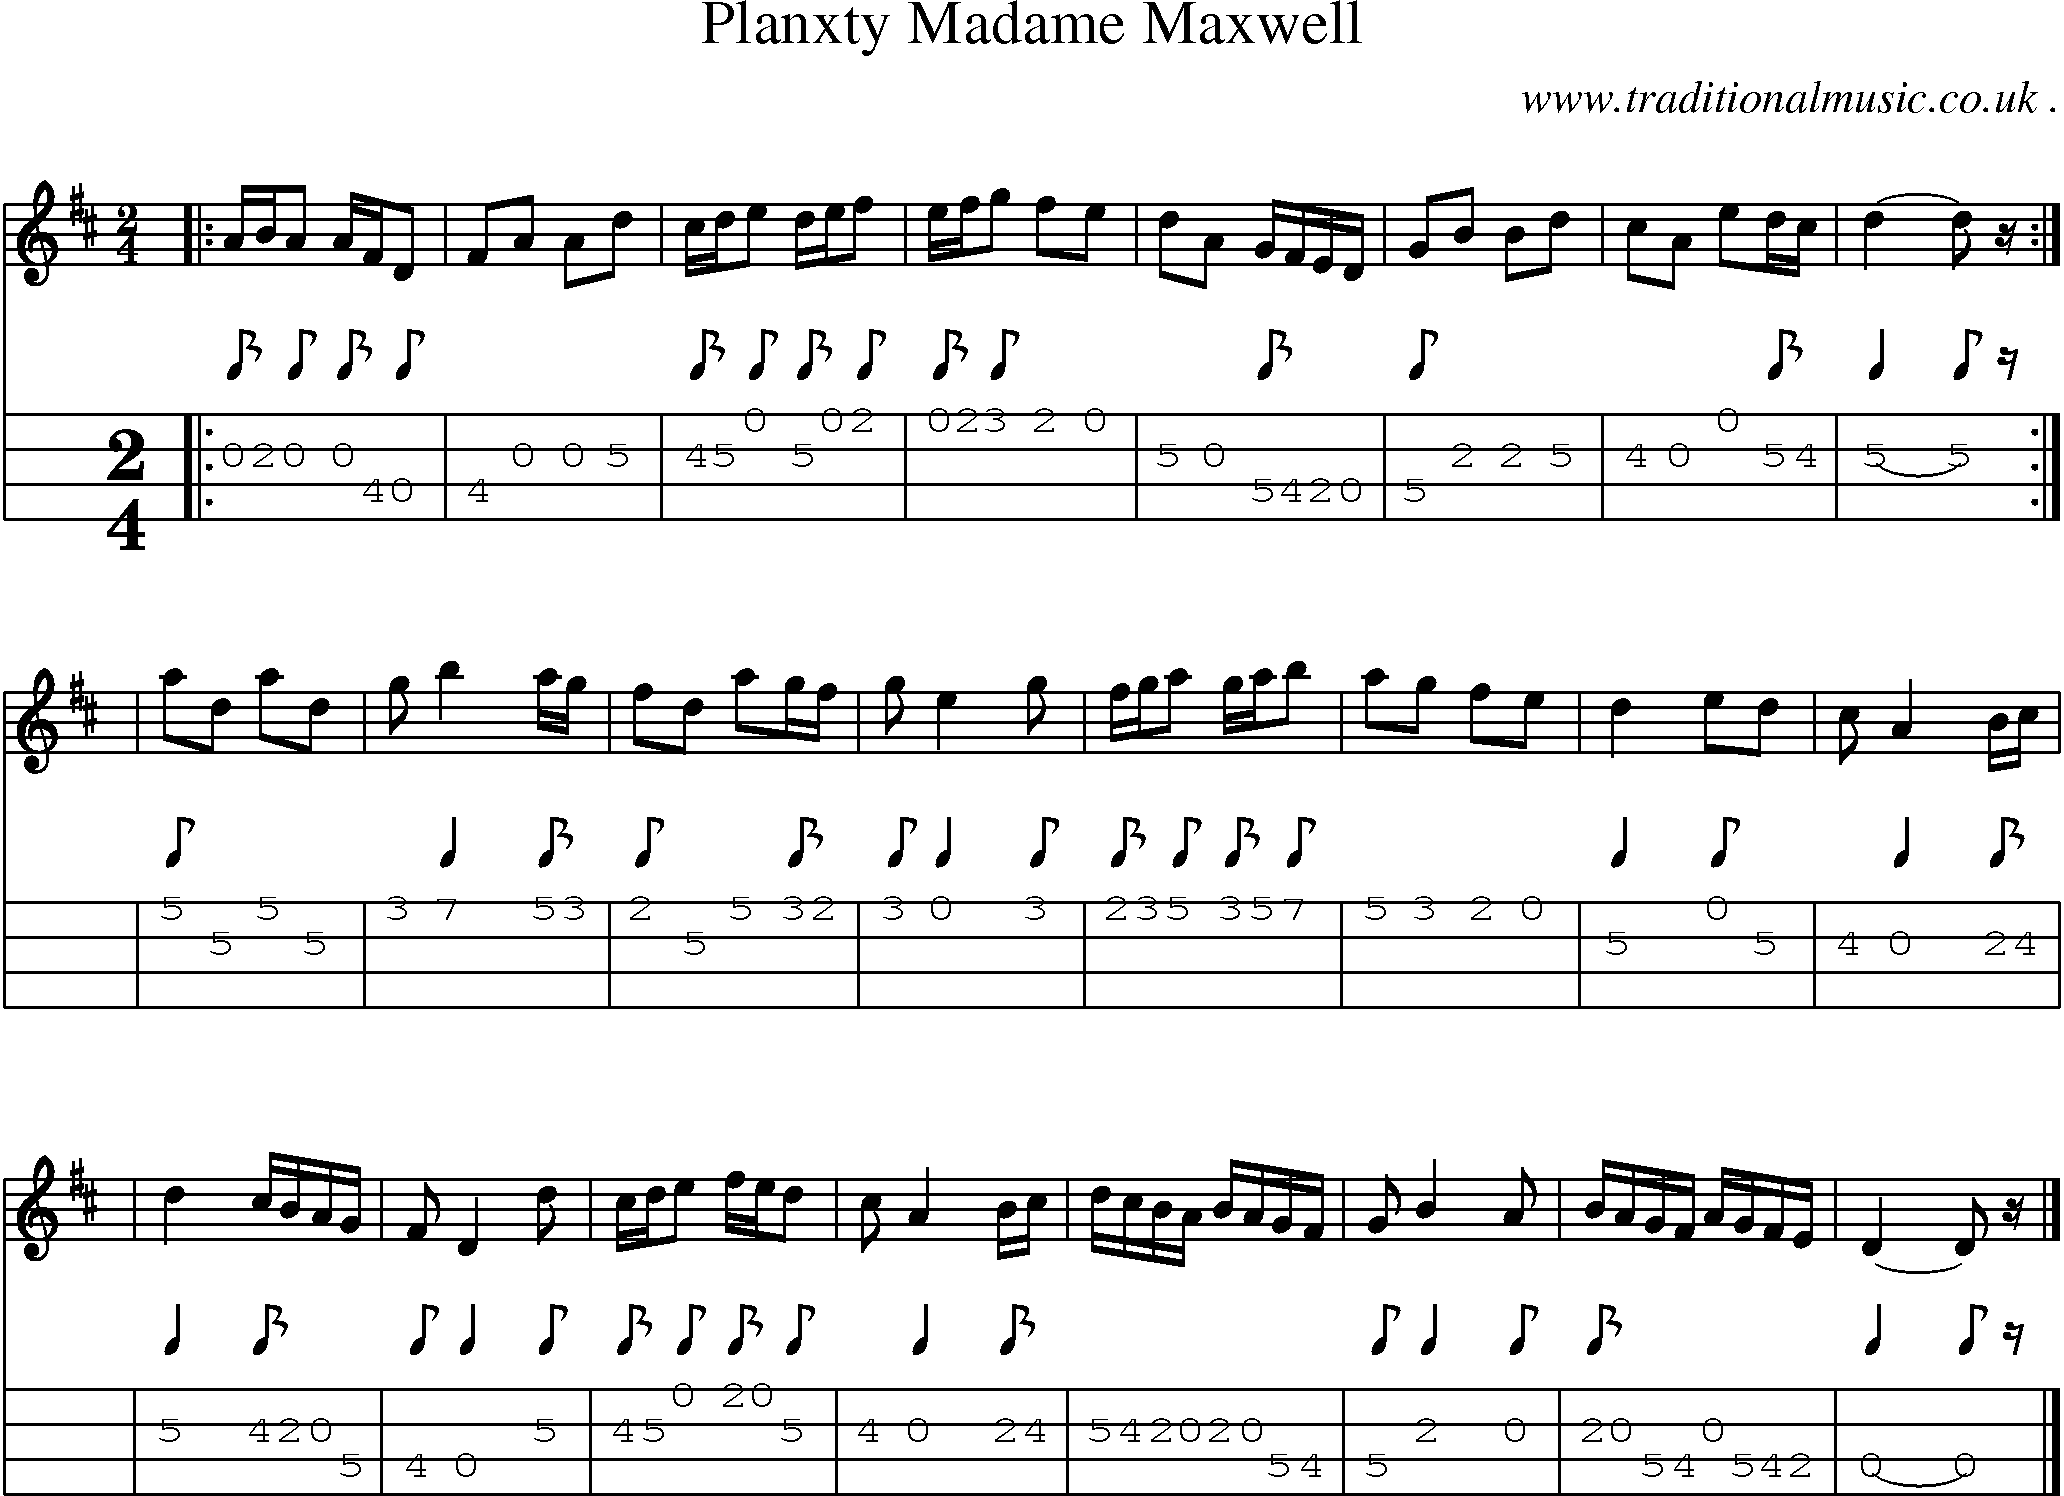 Sheet-music  score, Chords and Mandolin Tabs for Planxty Madame Maxwell